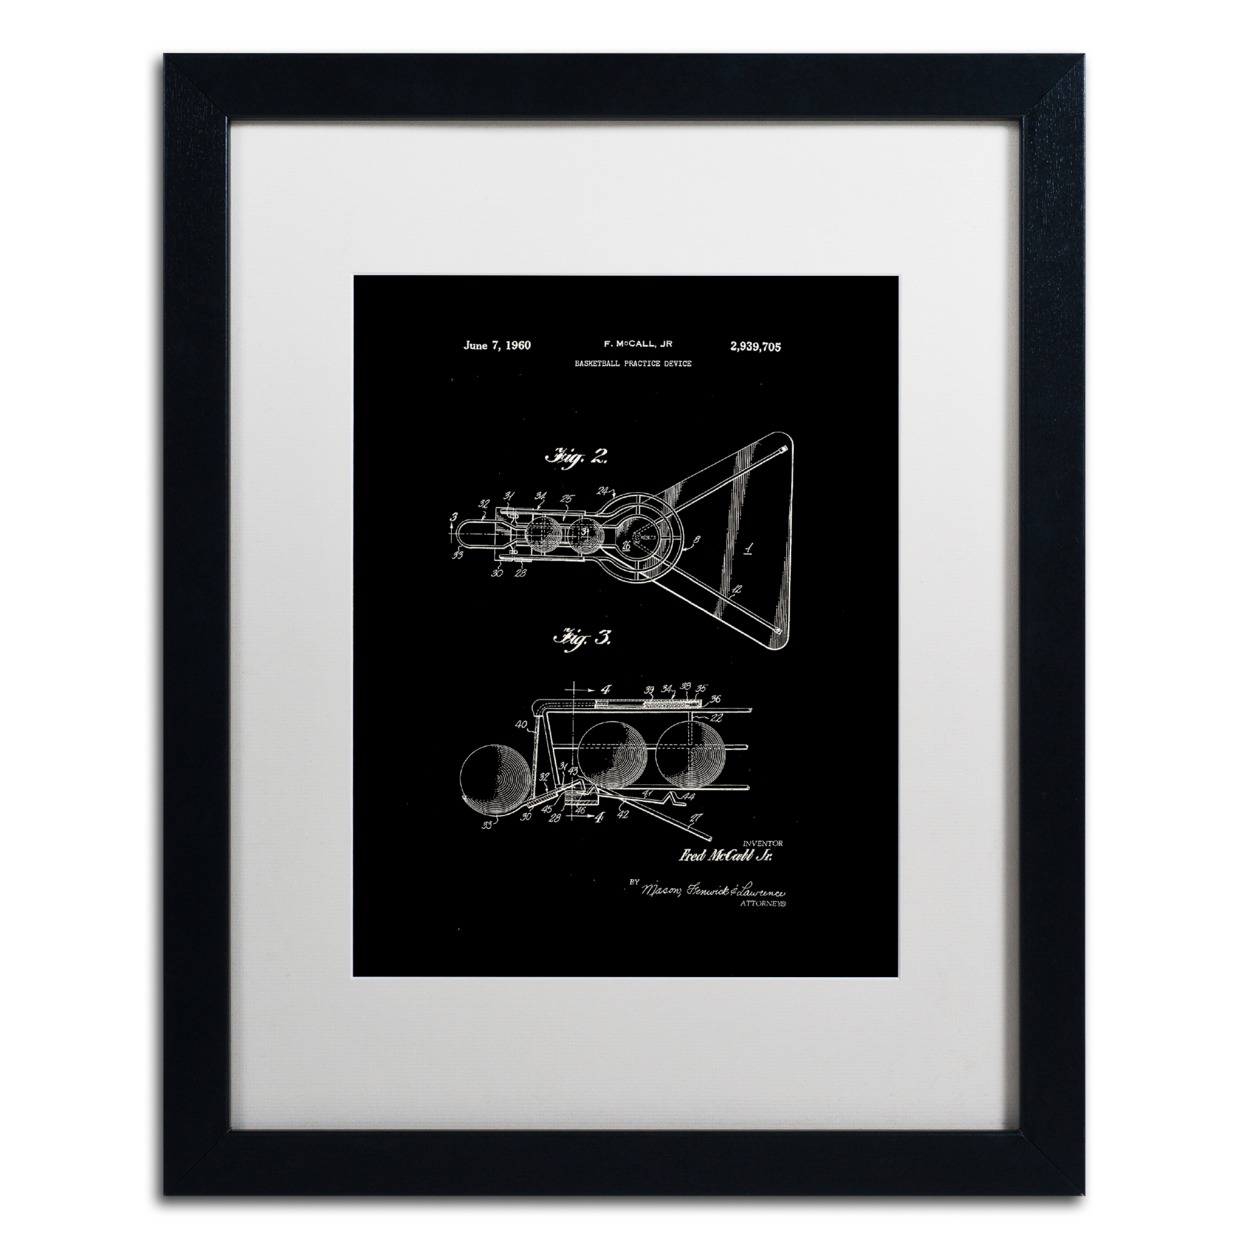 Claire Doherty 'Practice Device Patent Part 2 Black' Black Wooden Framed Art 18 X 22 Inches